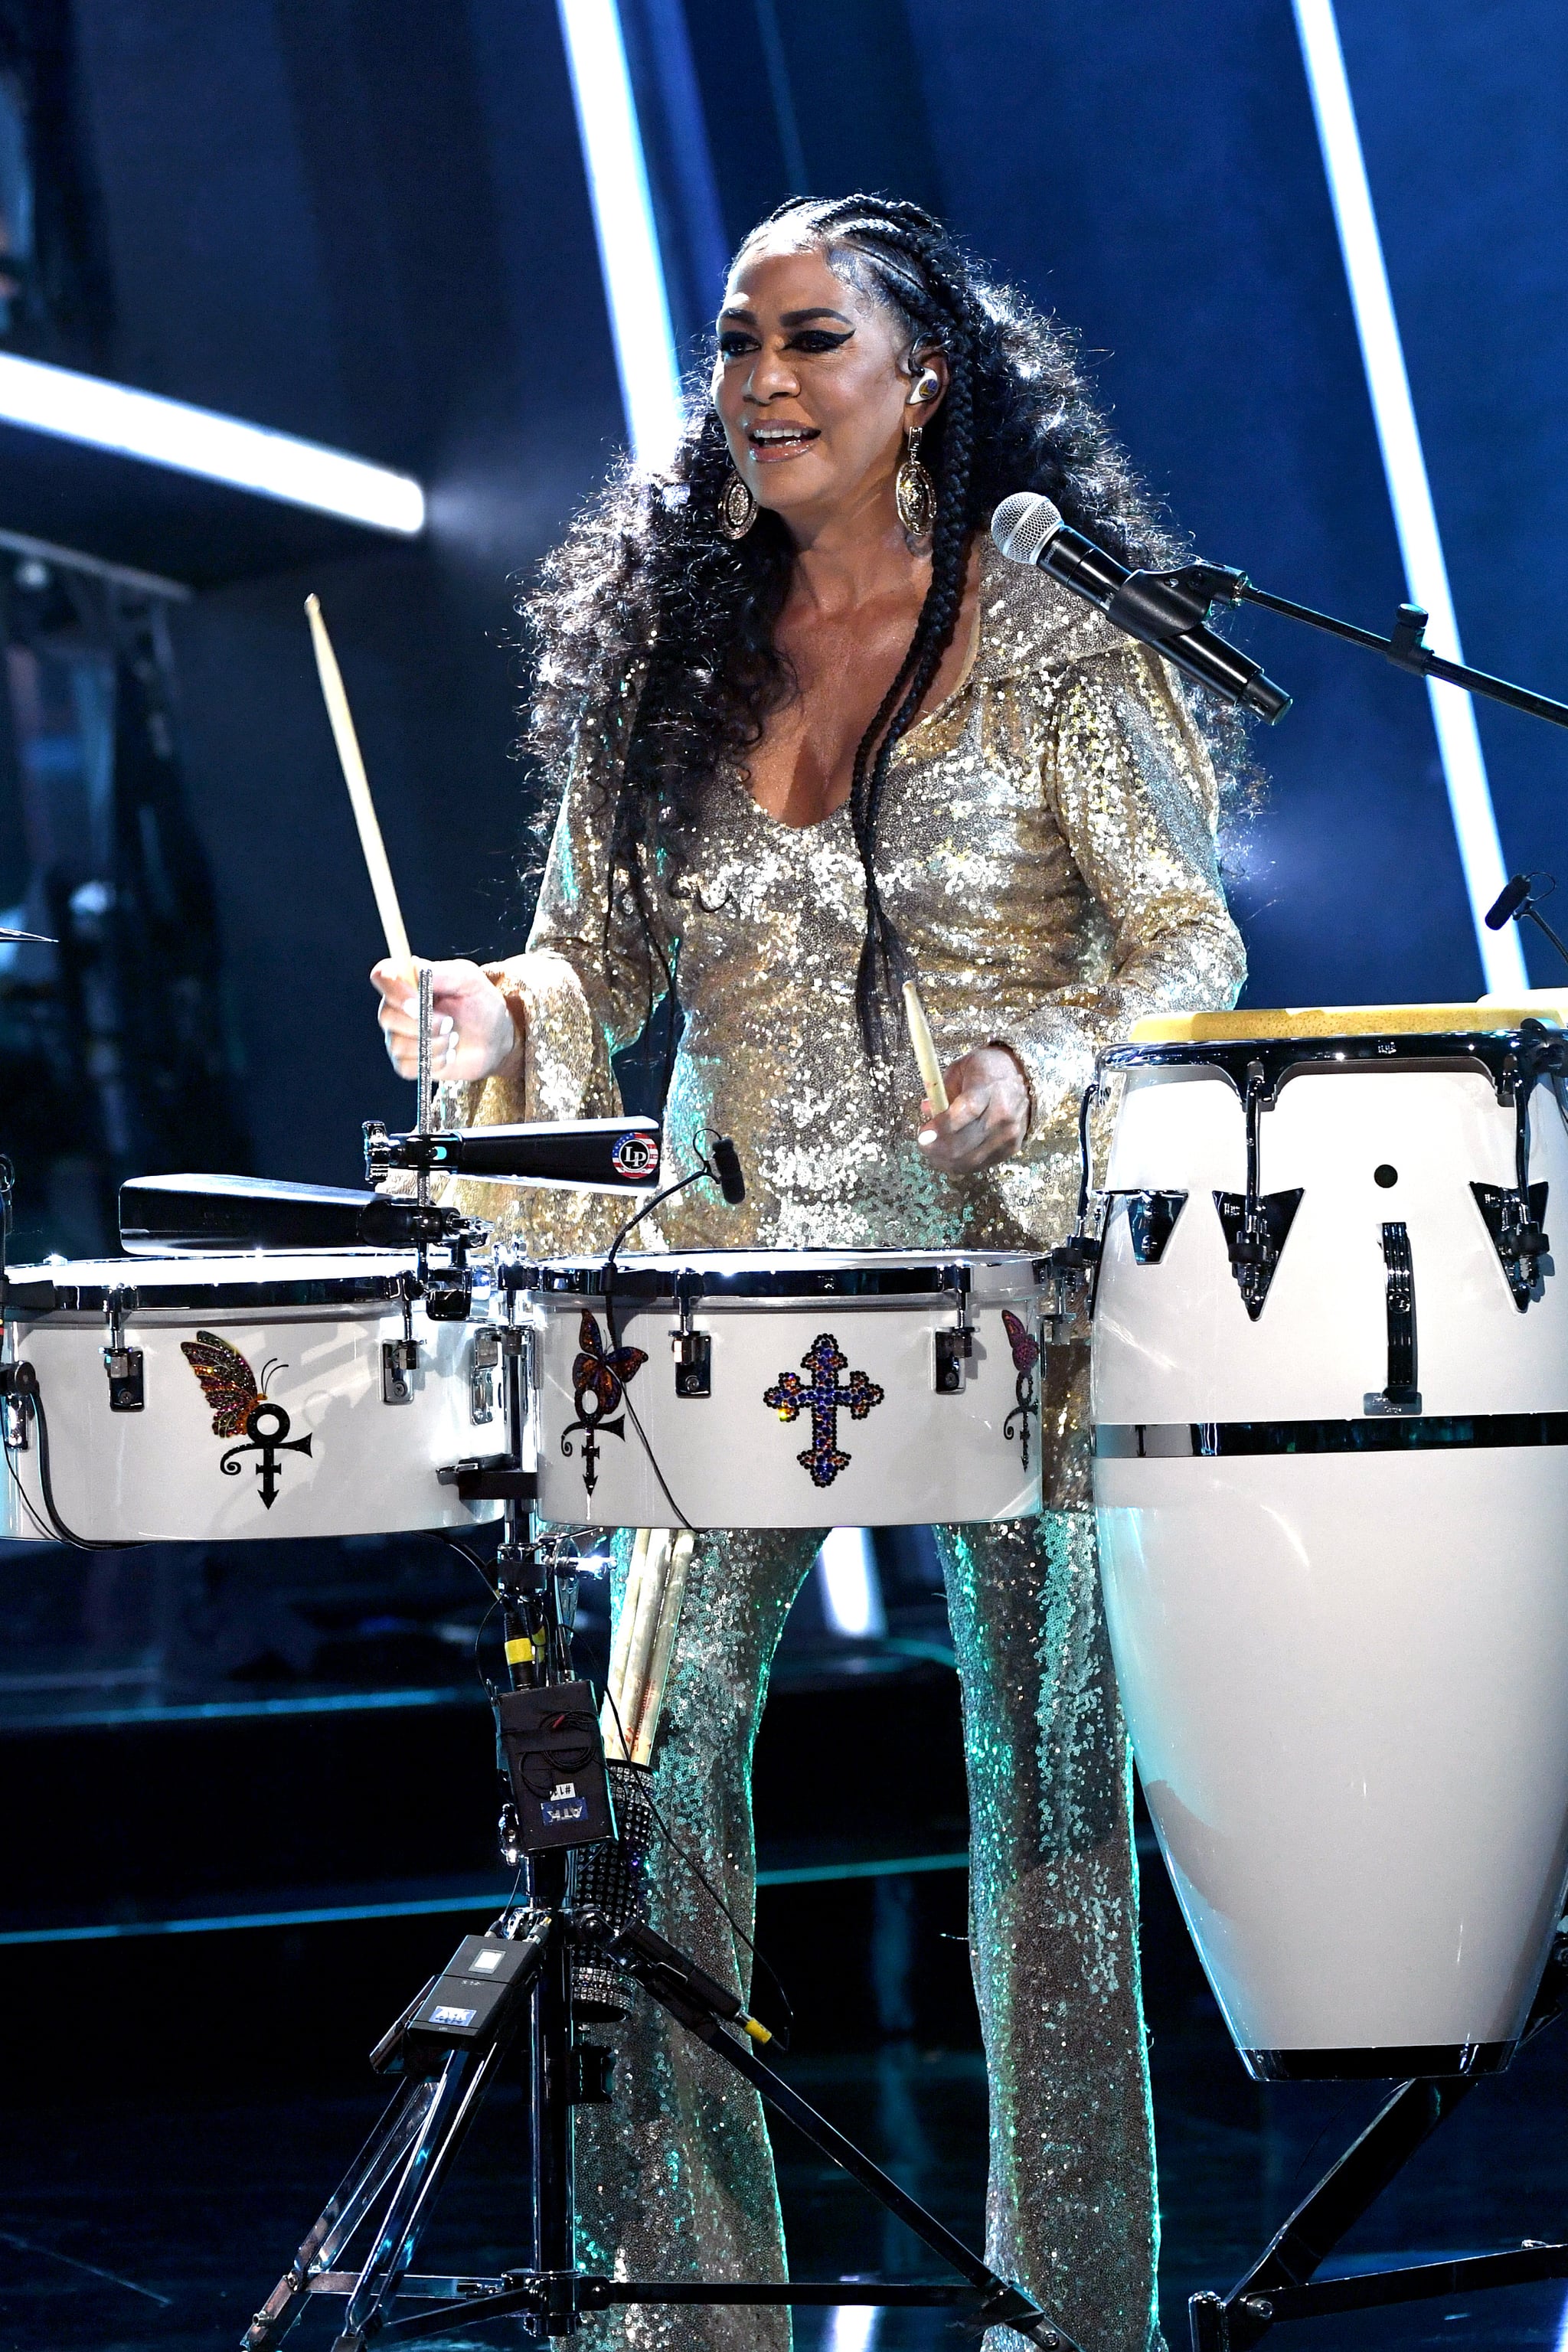 Sheila e of pictures 17+ Pictures